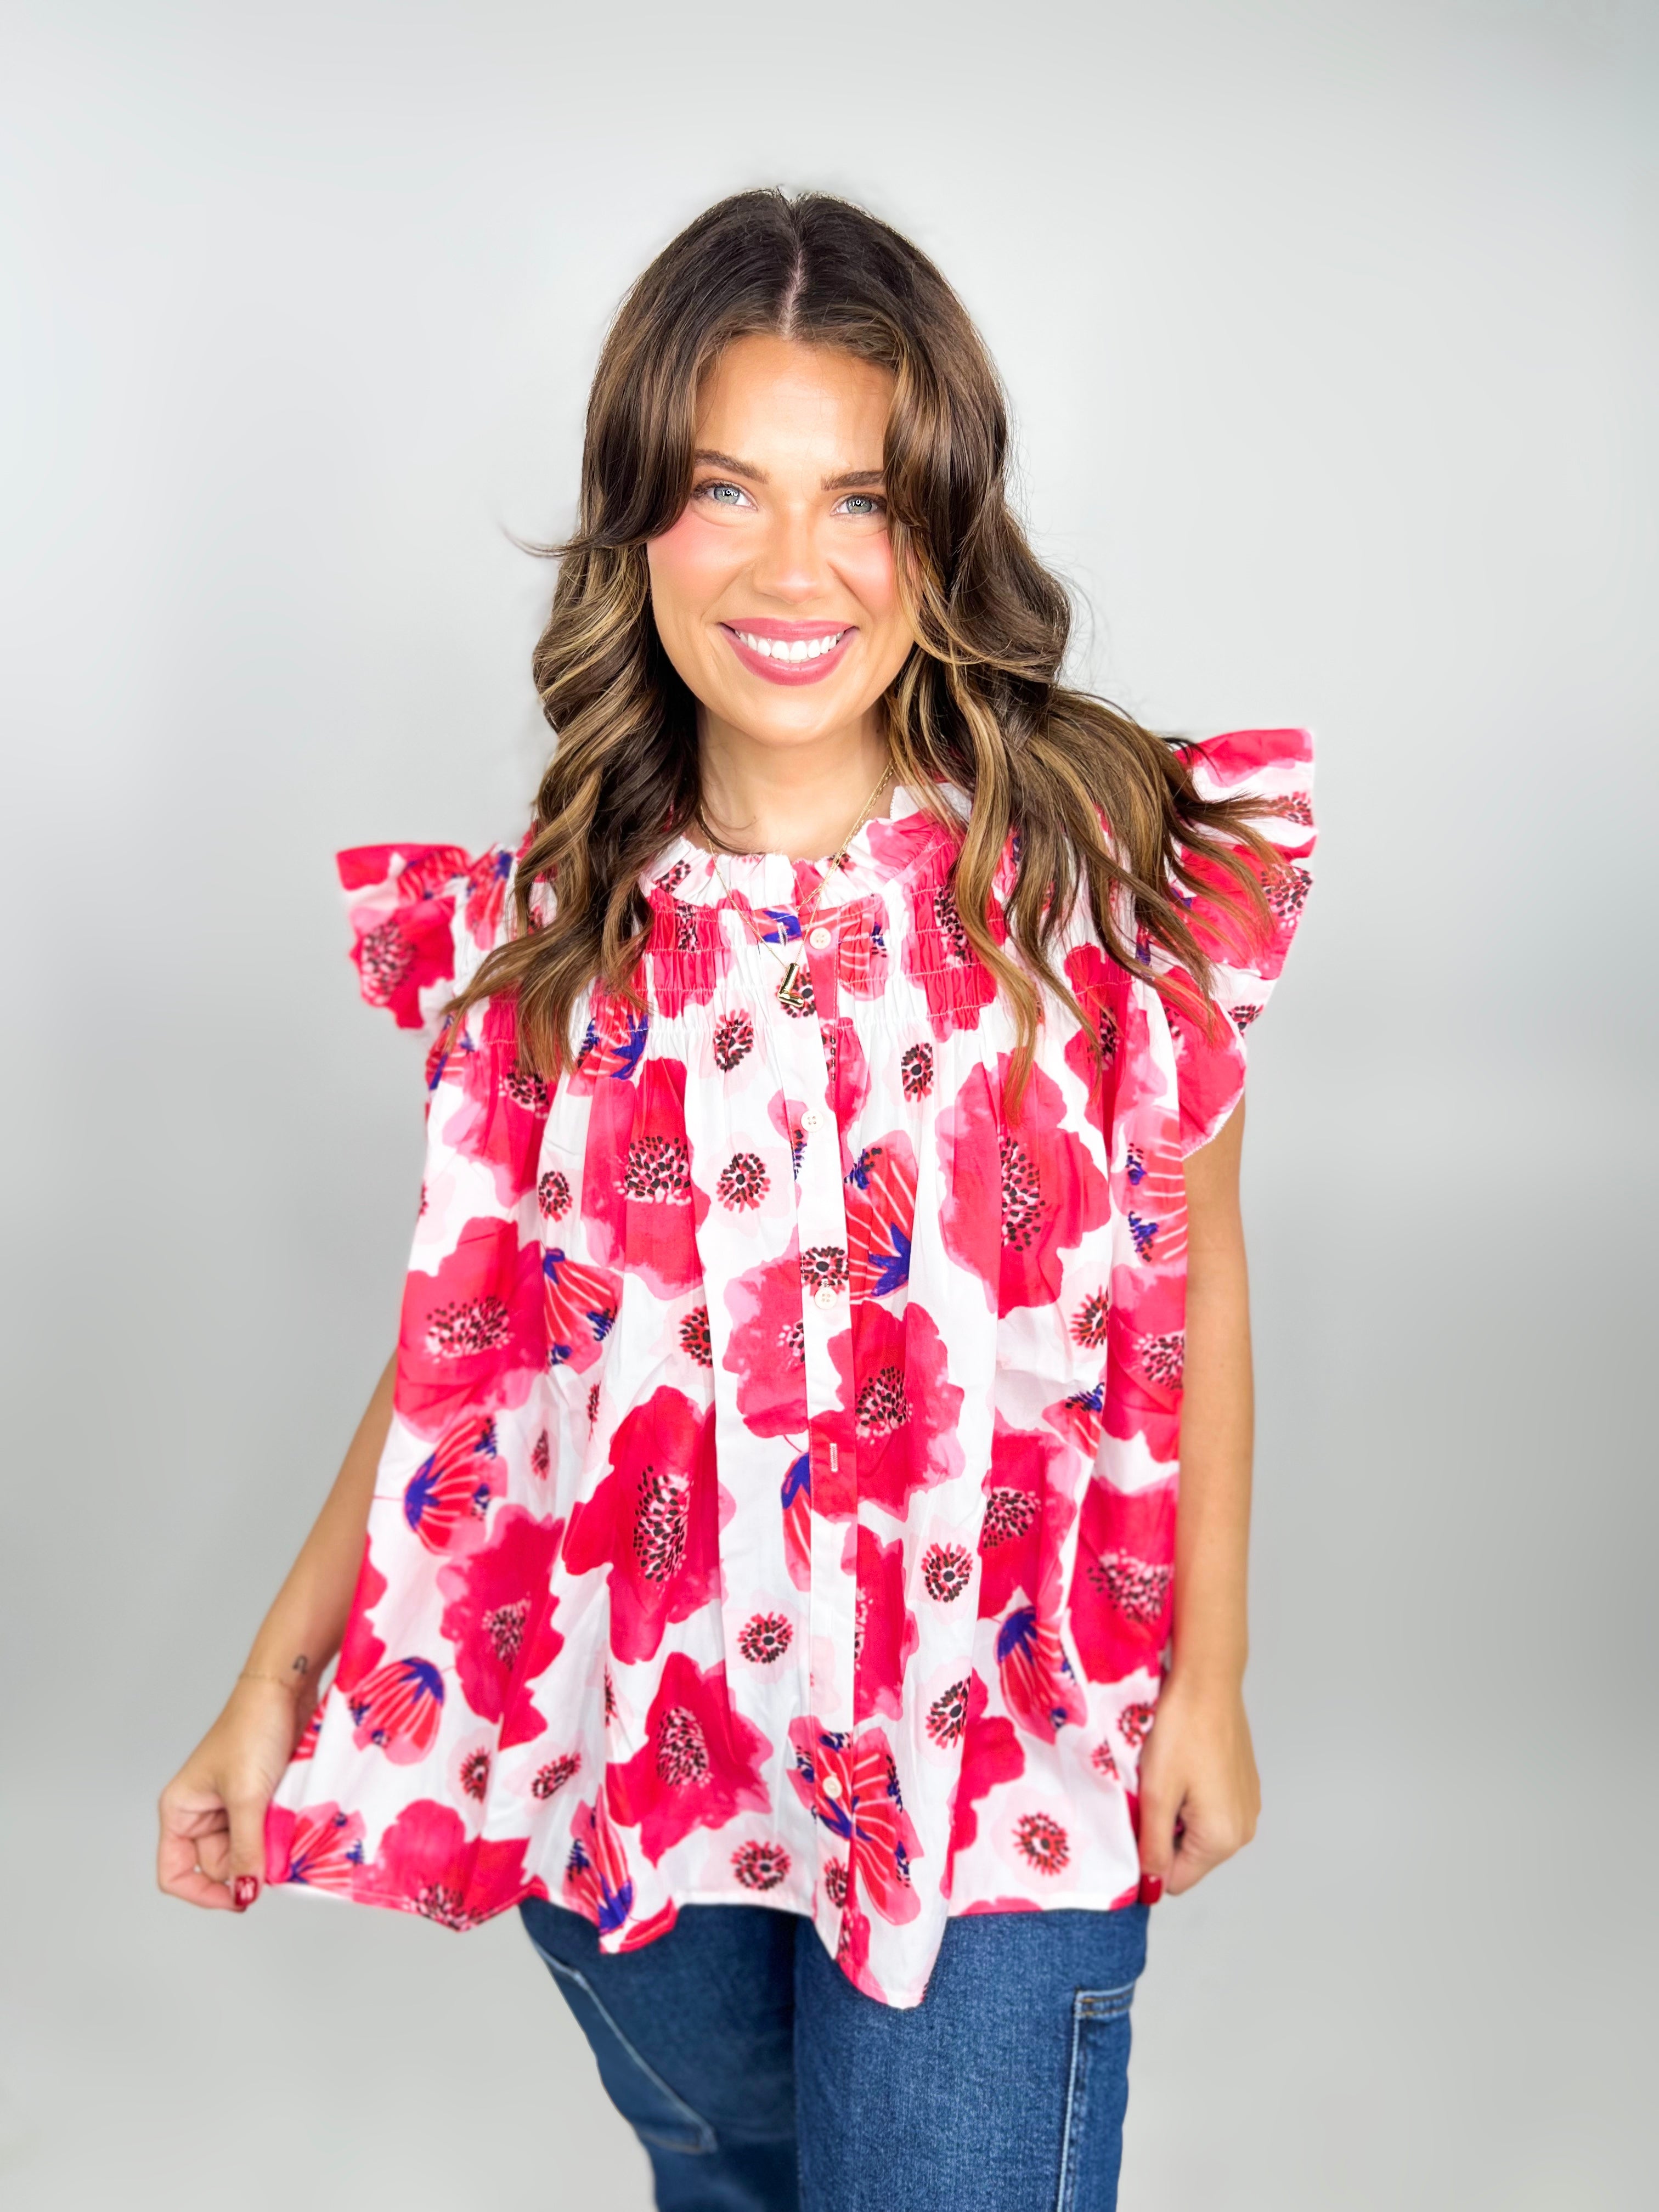 Flitter Flutter Top-110 Short Sleeve Top-Bibi-Heathered Boho Boutique, Women's Fashion and Accessories in Palmetto, FL